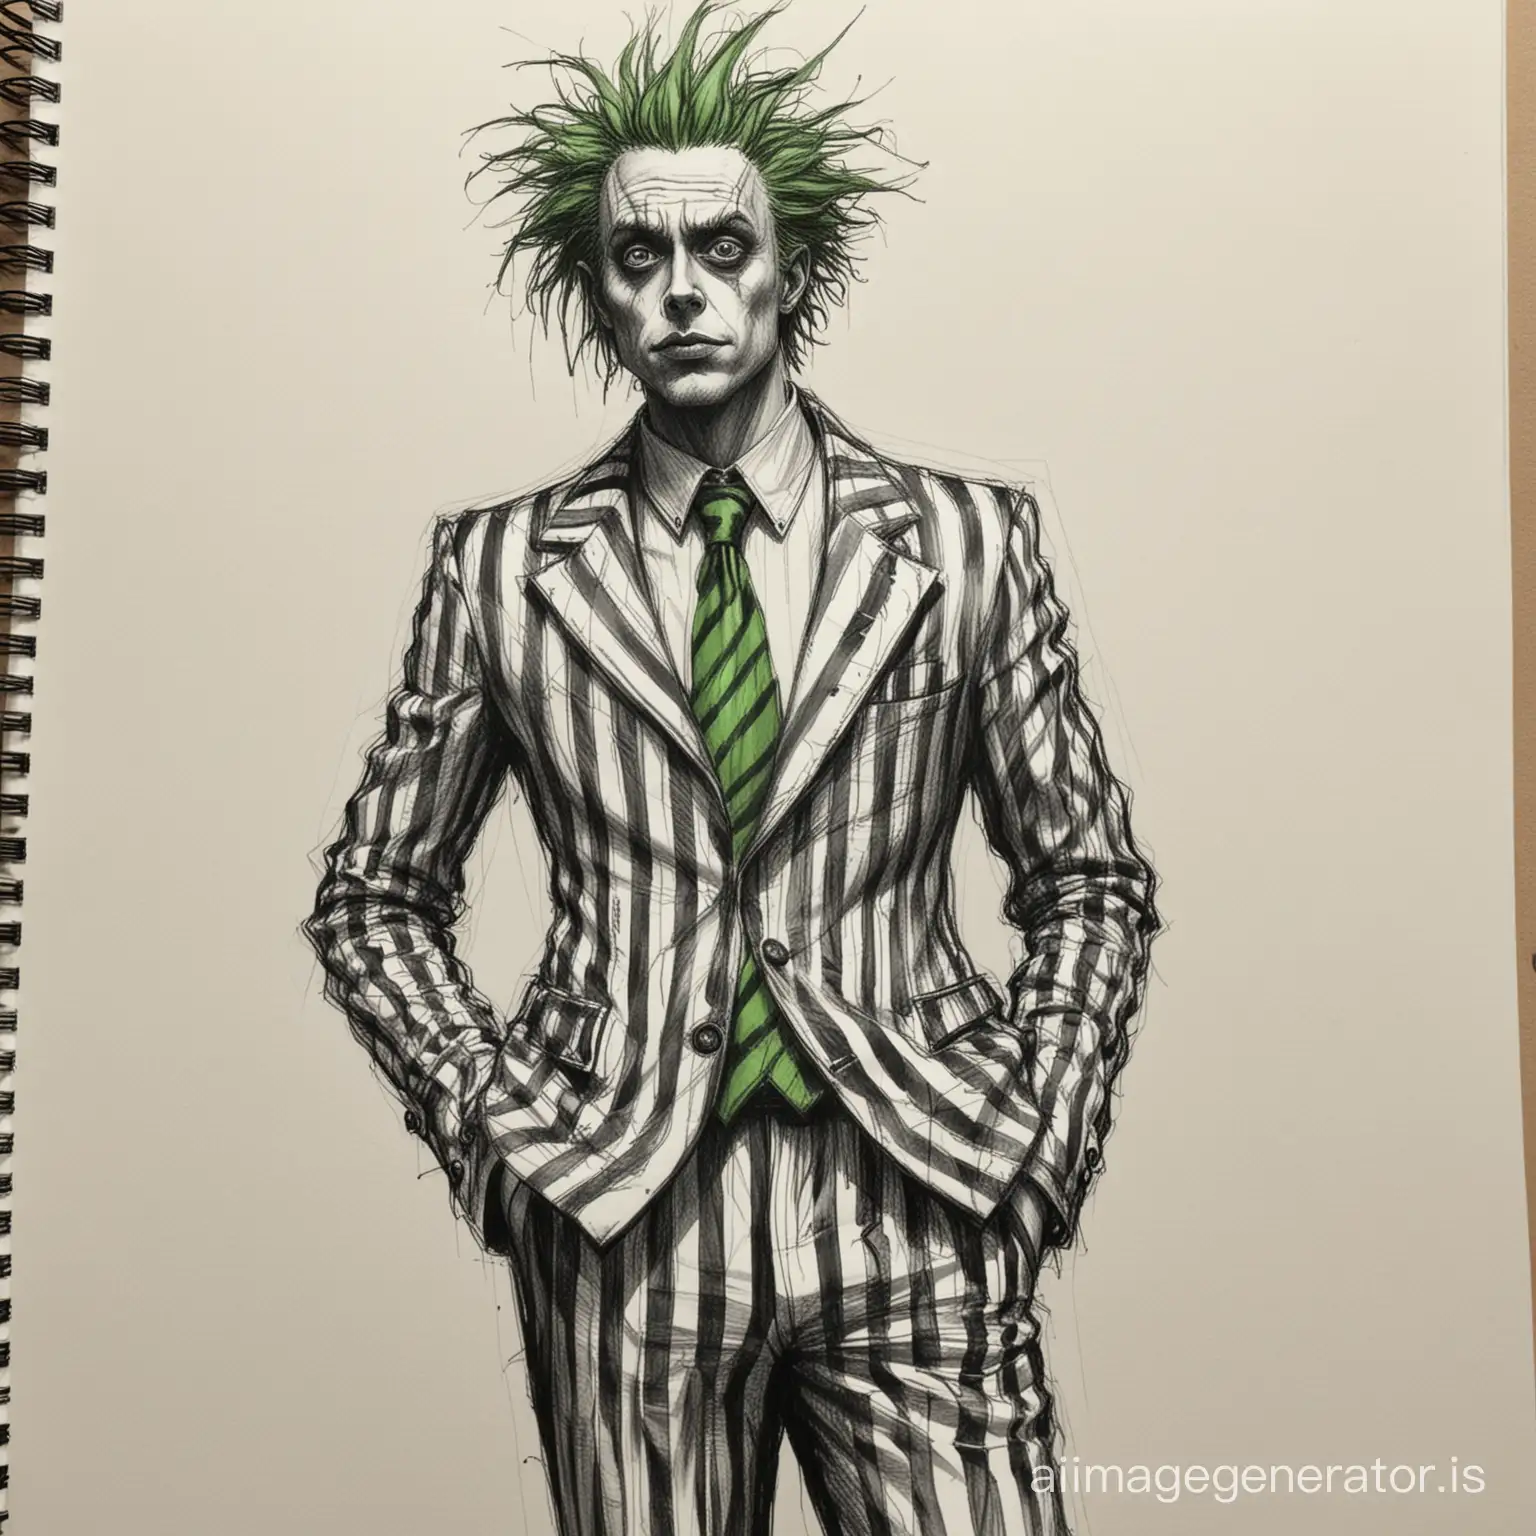 Tim-Burton-Style-Sketch-of-a-Mysterious-Man-in-Striped-Suit